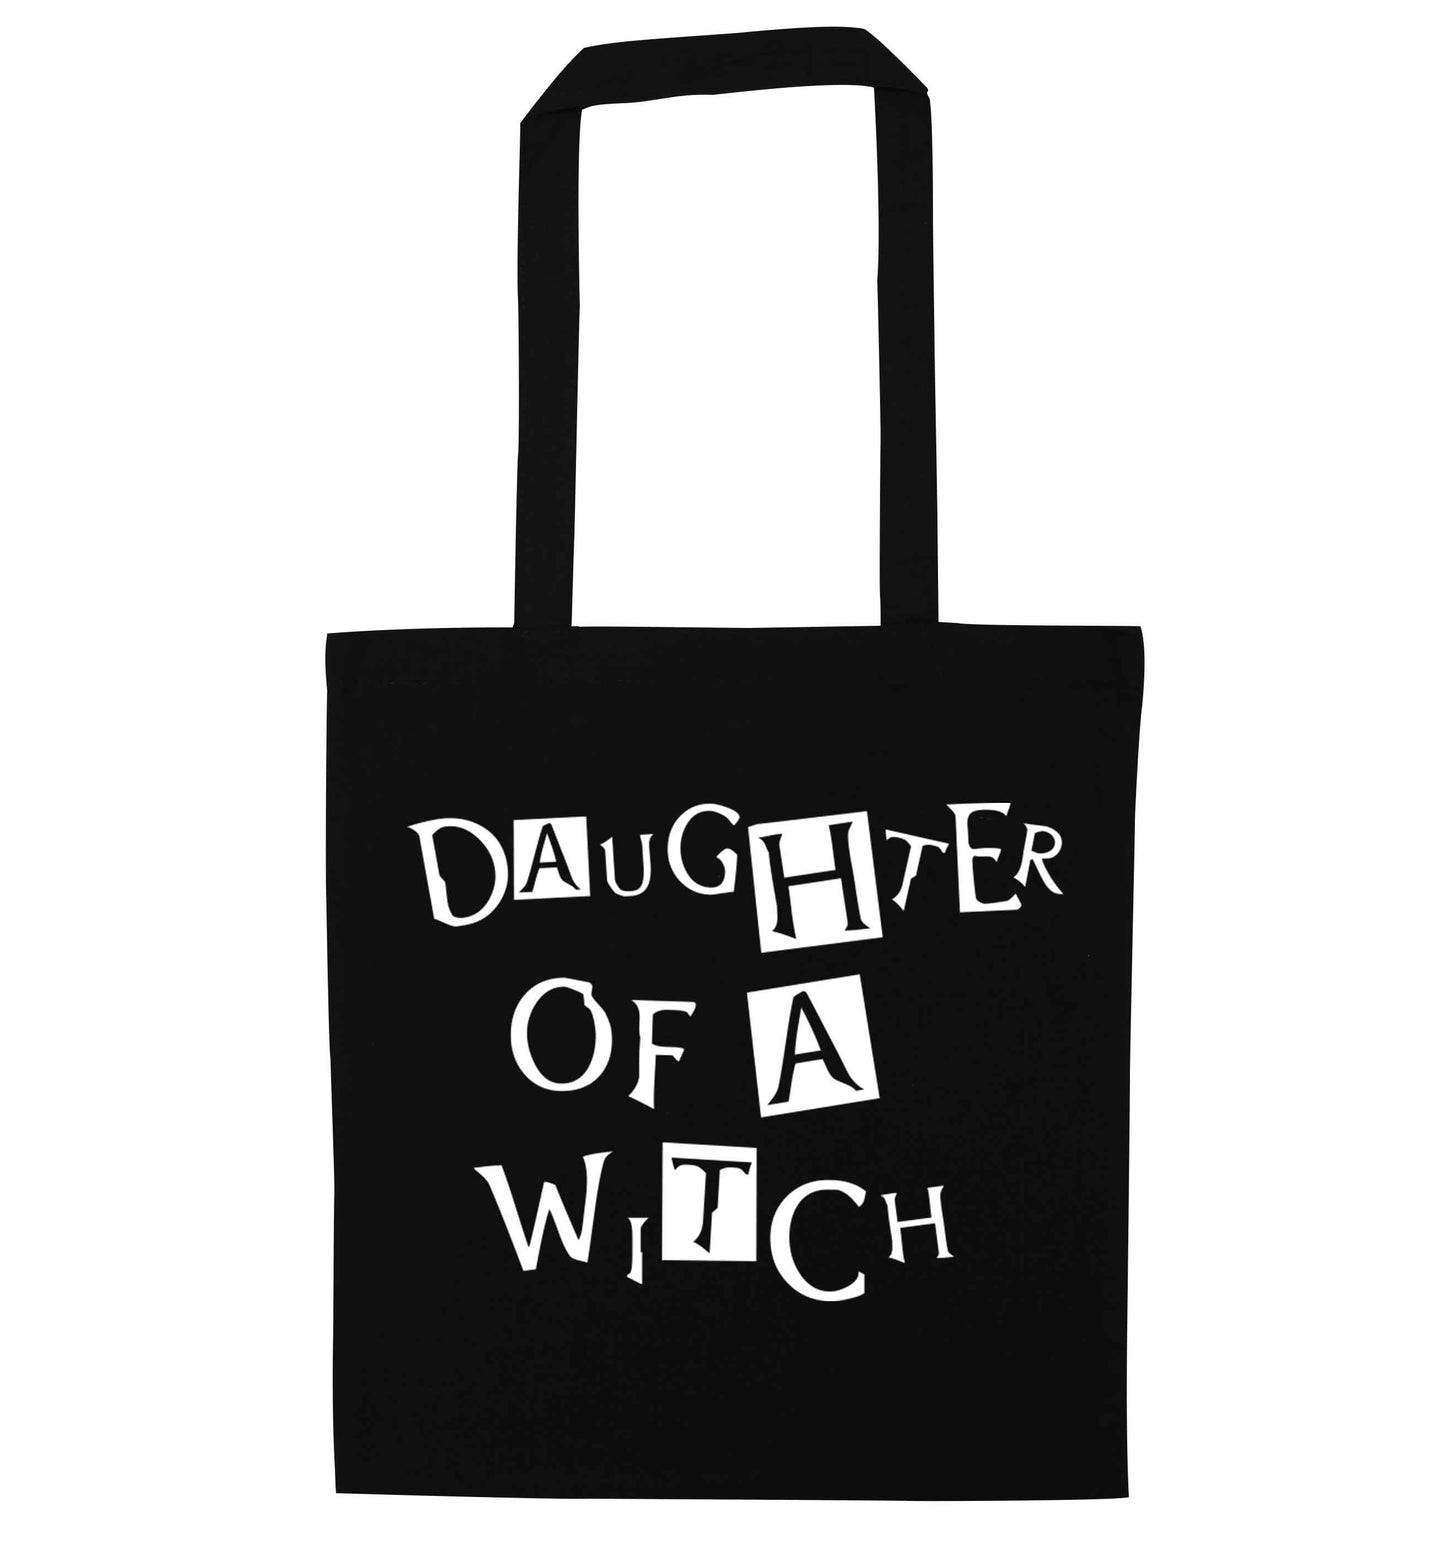 Daughter of a witch black tote bag